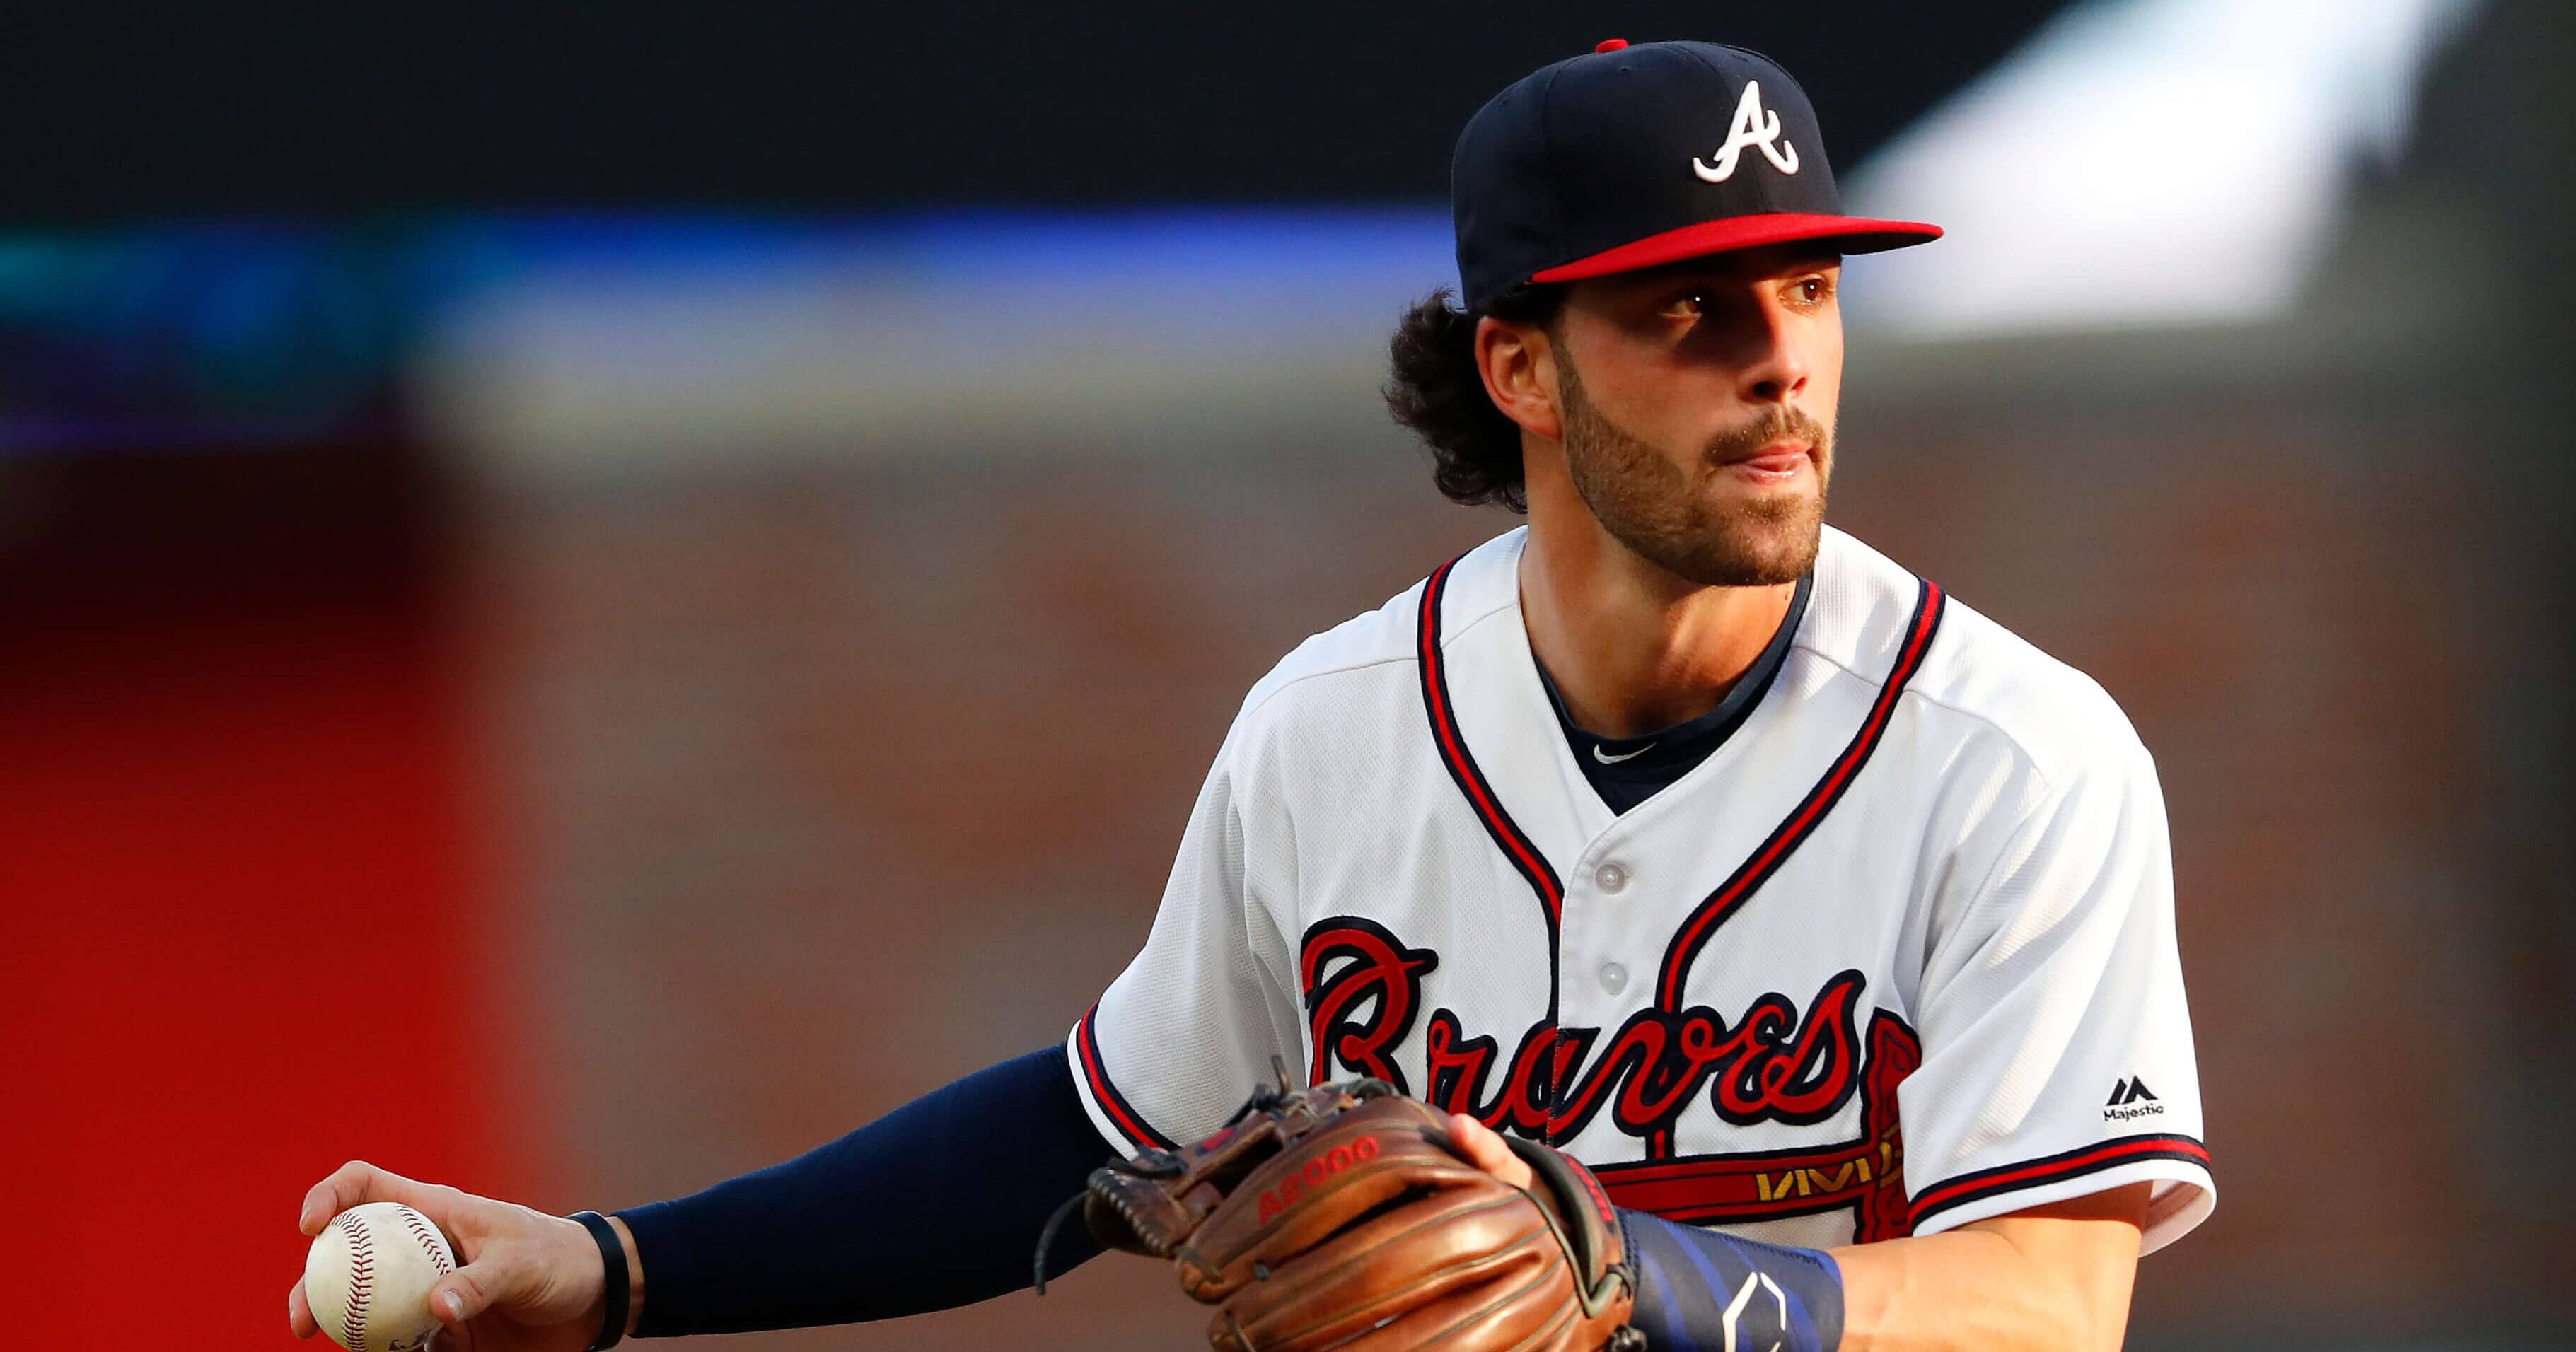 In this May 30, 2018, file photo, Atlanta Braves shortstop Dansby Swanson (7) warms up before the first inning of a baseball game against the New York Mets, in Atlanta. The Braves are trying to determine the status of shortstop Dansby Swanson, who has a sore wrist, as they prepare to open their NLDS against the Los Angeles Dodgers.